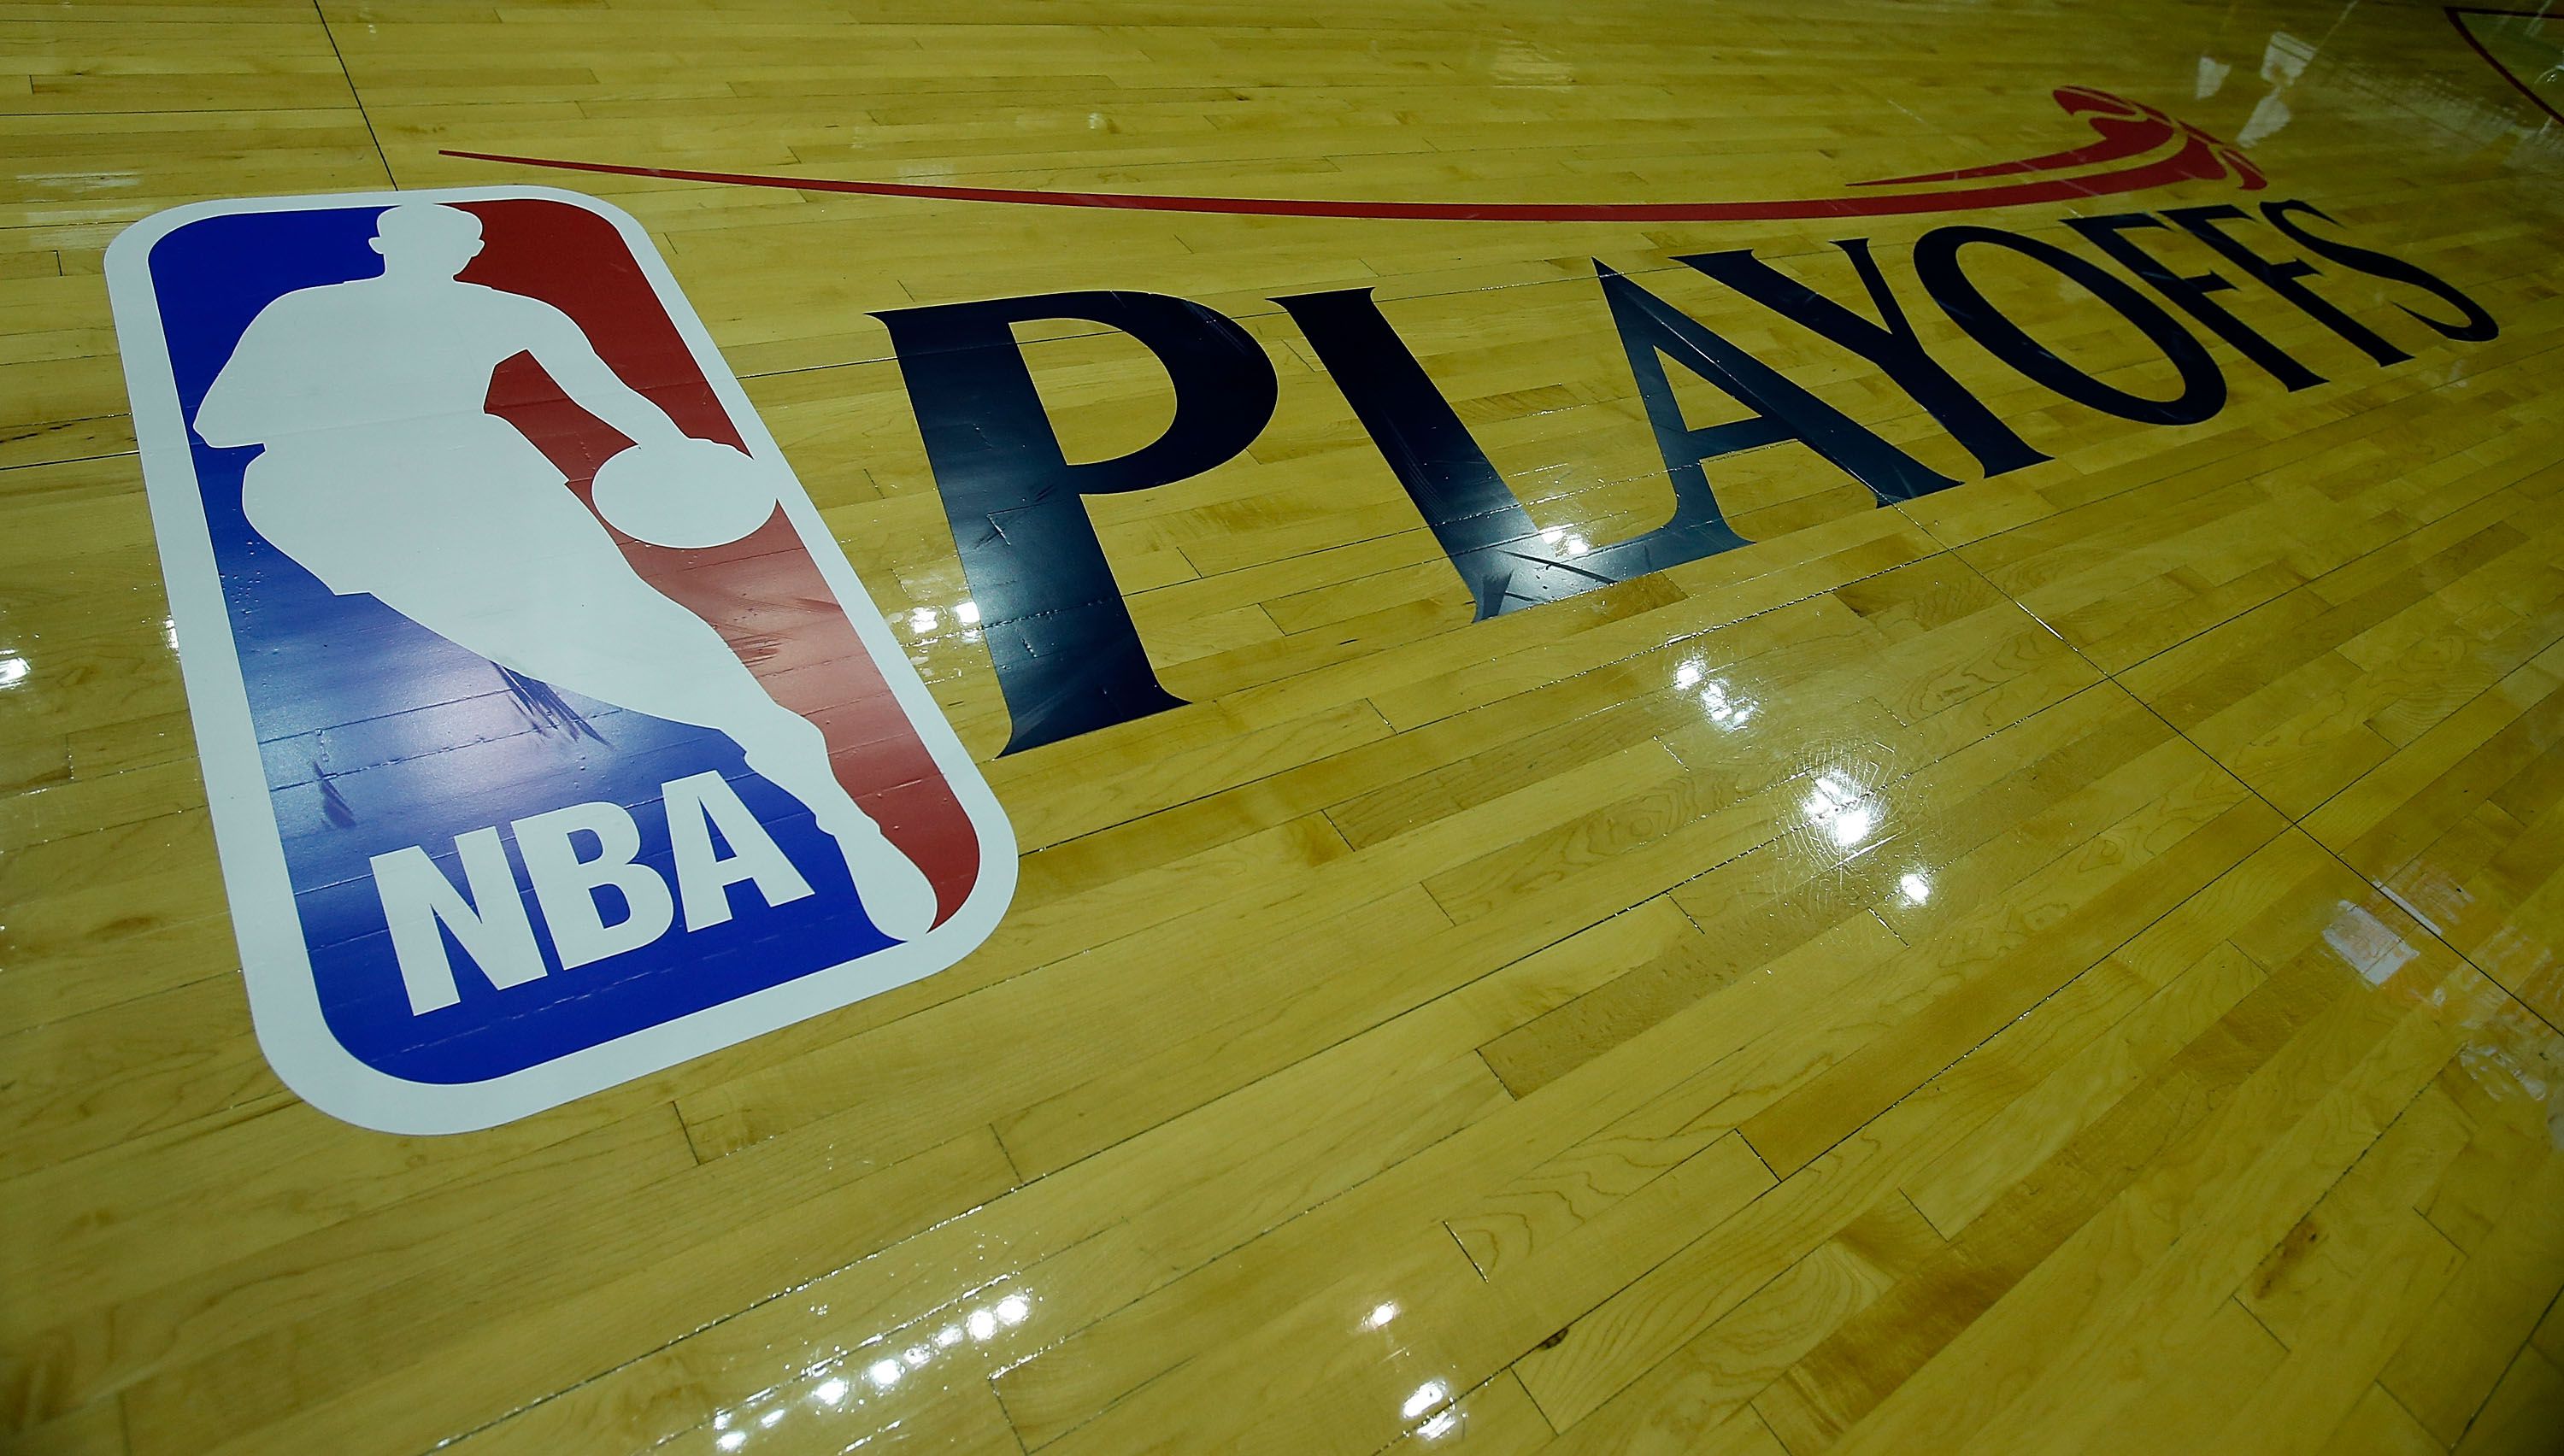 Nba Restart Schedule Game 7 Of Finals Could Be Held As Late As Oct 12 At Walt Disney World Report Masslive Com